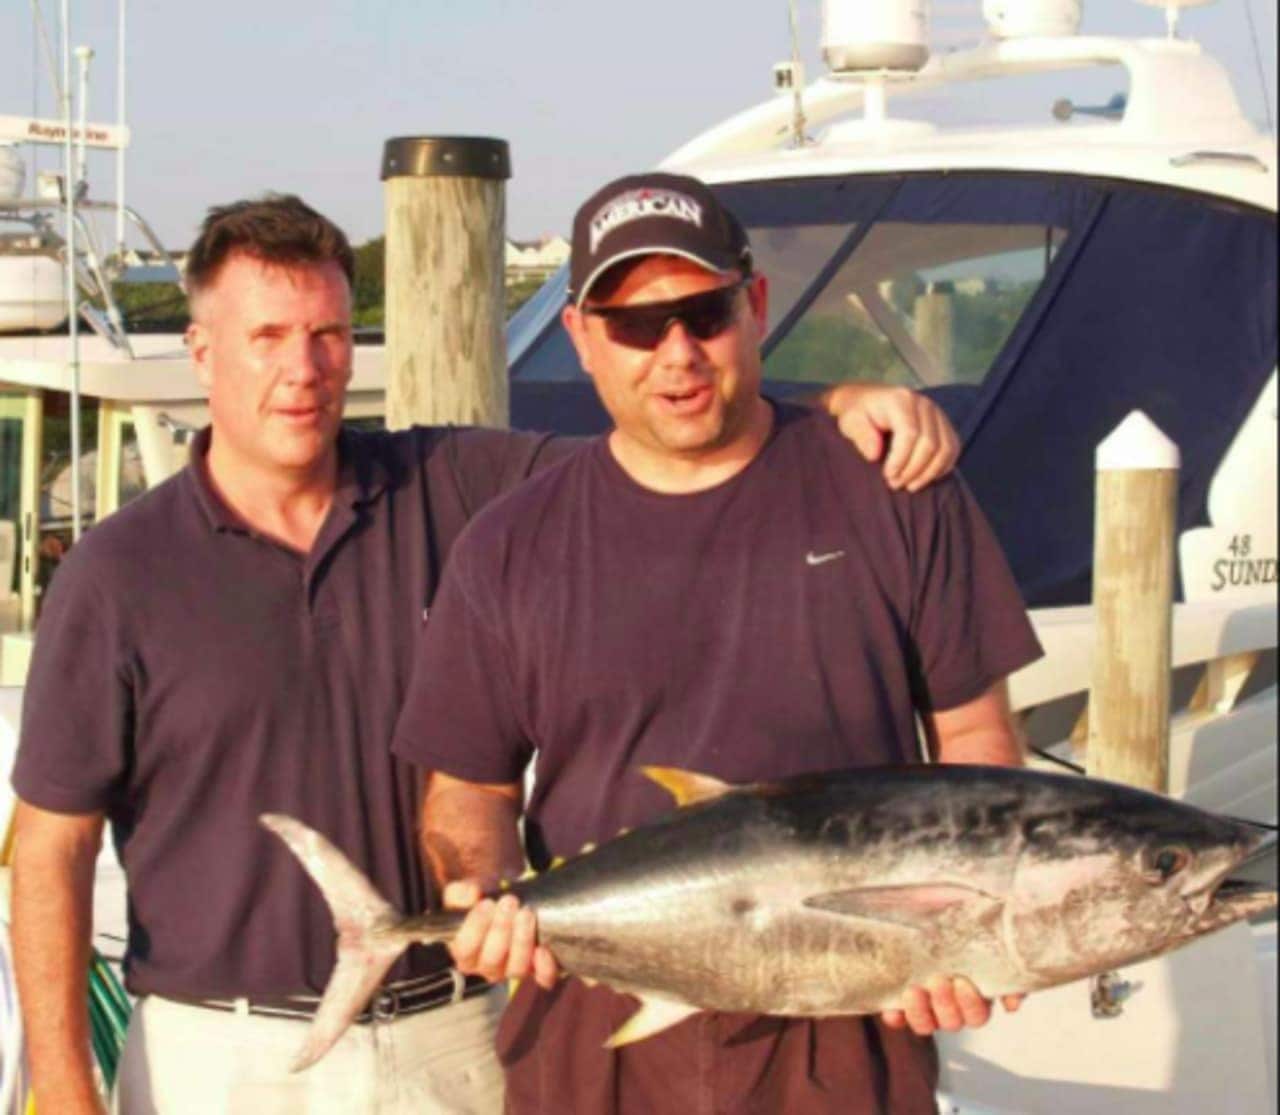 Todd Howe, left, and Joseph Percoco on a 2010 fishing trip. Howe is the government's star witness in Percoco's corruption trial.